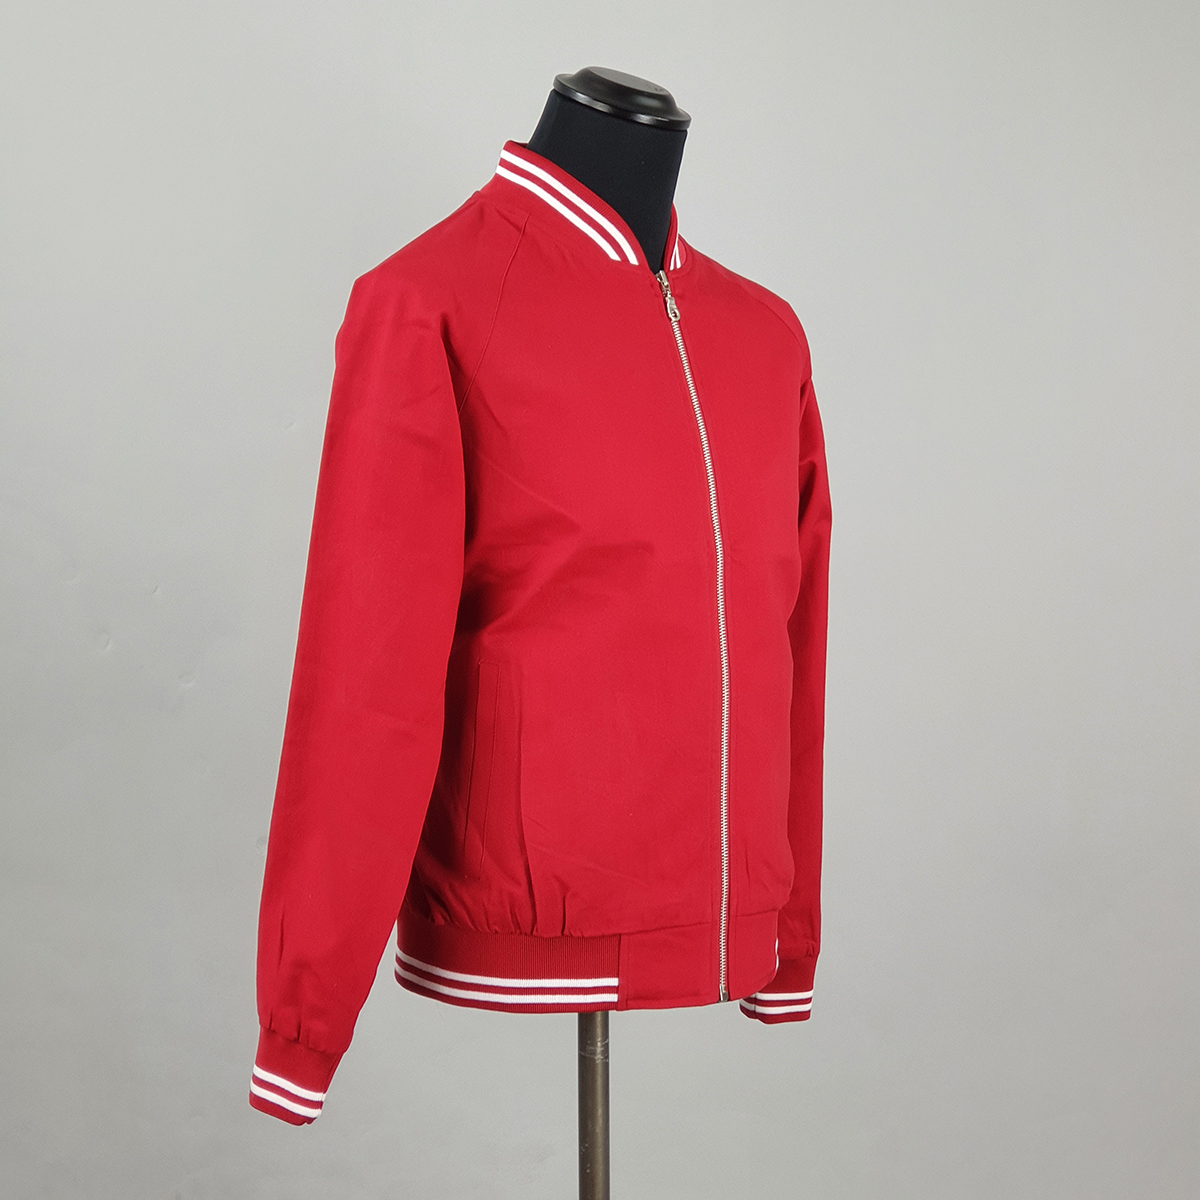 red jacket with white stripes